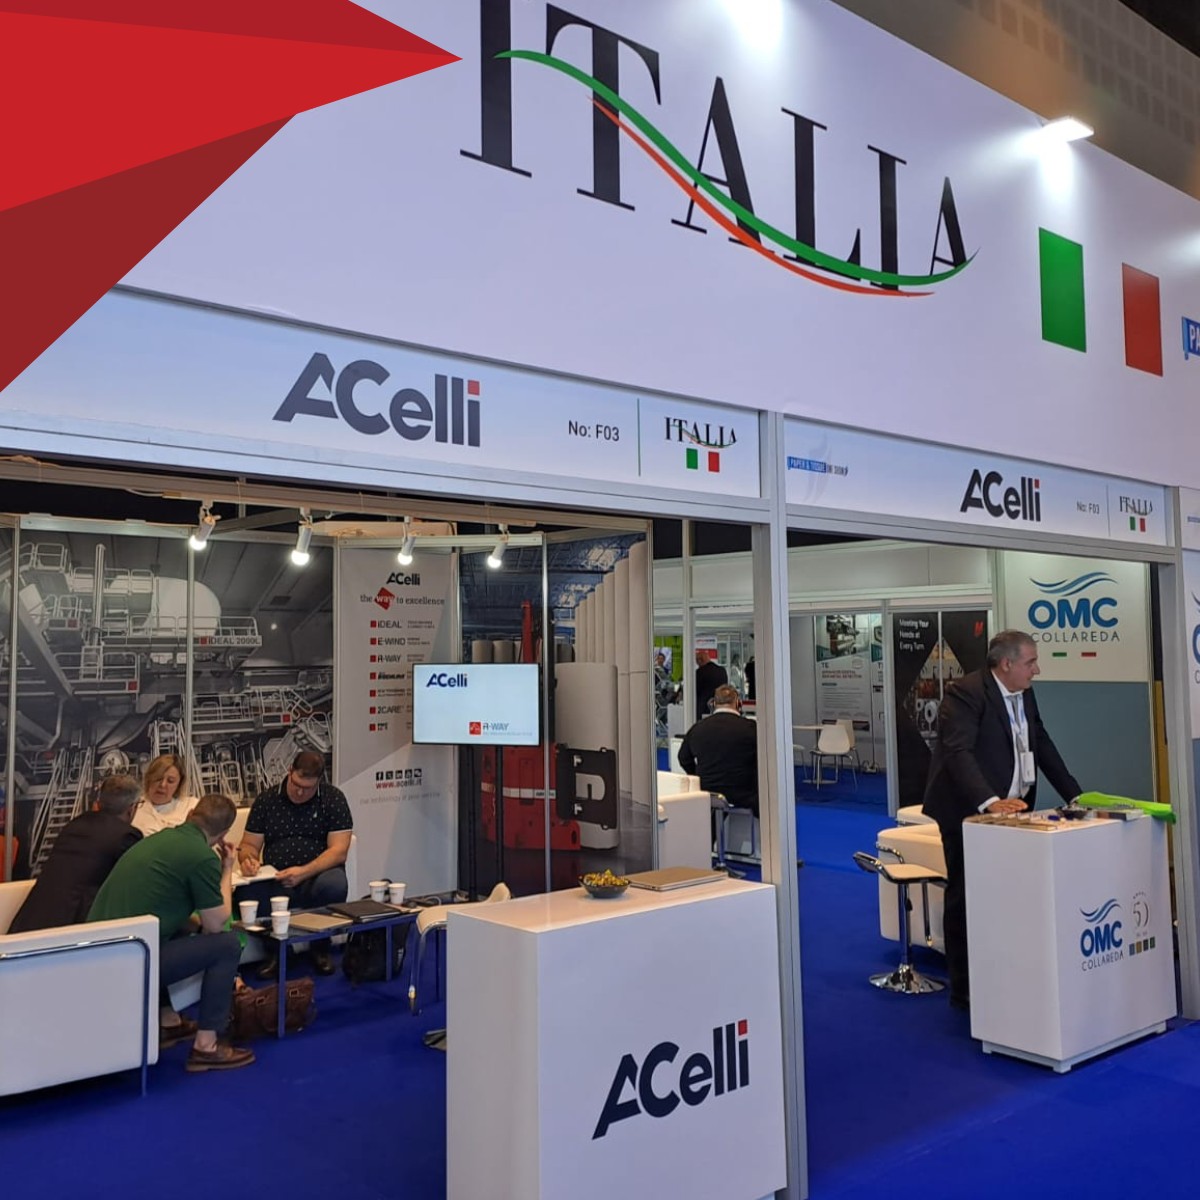 First day of 𝐏𝐀𝐏𝐄𝐑 & 𝐓𝐈𝐒𝐒𝐔𝐄 𝐎𝐍𝐄 𝐒𝐇𝐎𝐖 𝟐𝟎𝟐𝟒 here at the Abu Dhabi National Exhibition Center!

We are waiting for you at 𝐛𝐨𝐨𝐭𝐡 𝐍𝐨 𝐅𝟎𝟑

#acelli #onaroll #tissue #paper #papertissueoneshow #paperoneshow #exhibition #abudhabi #EAU